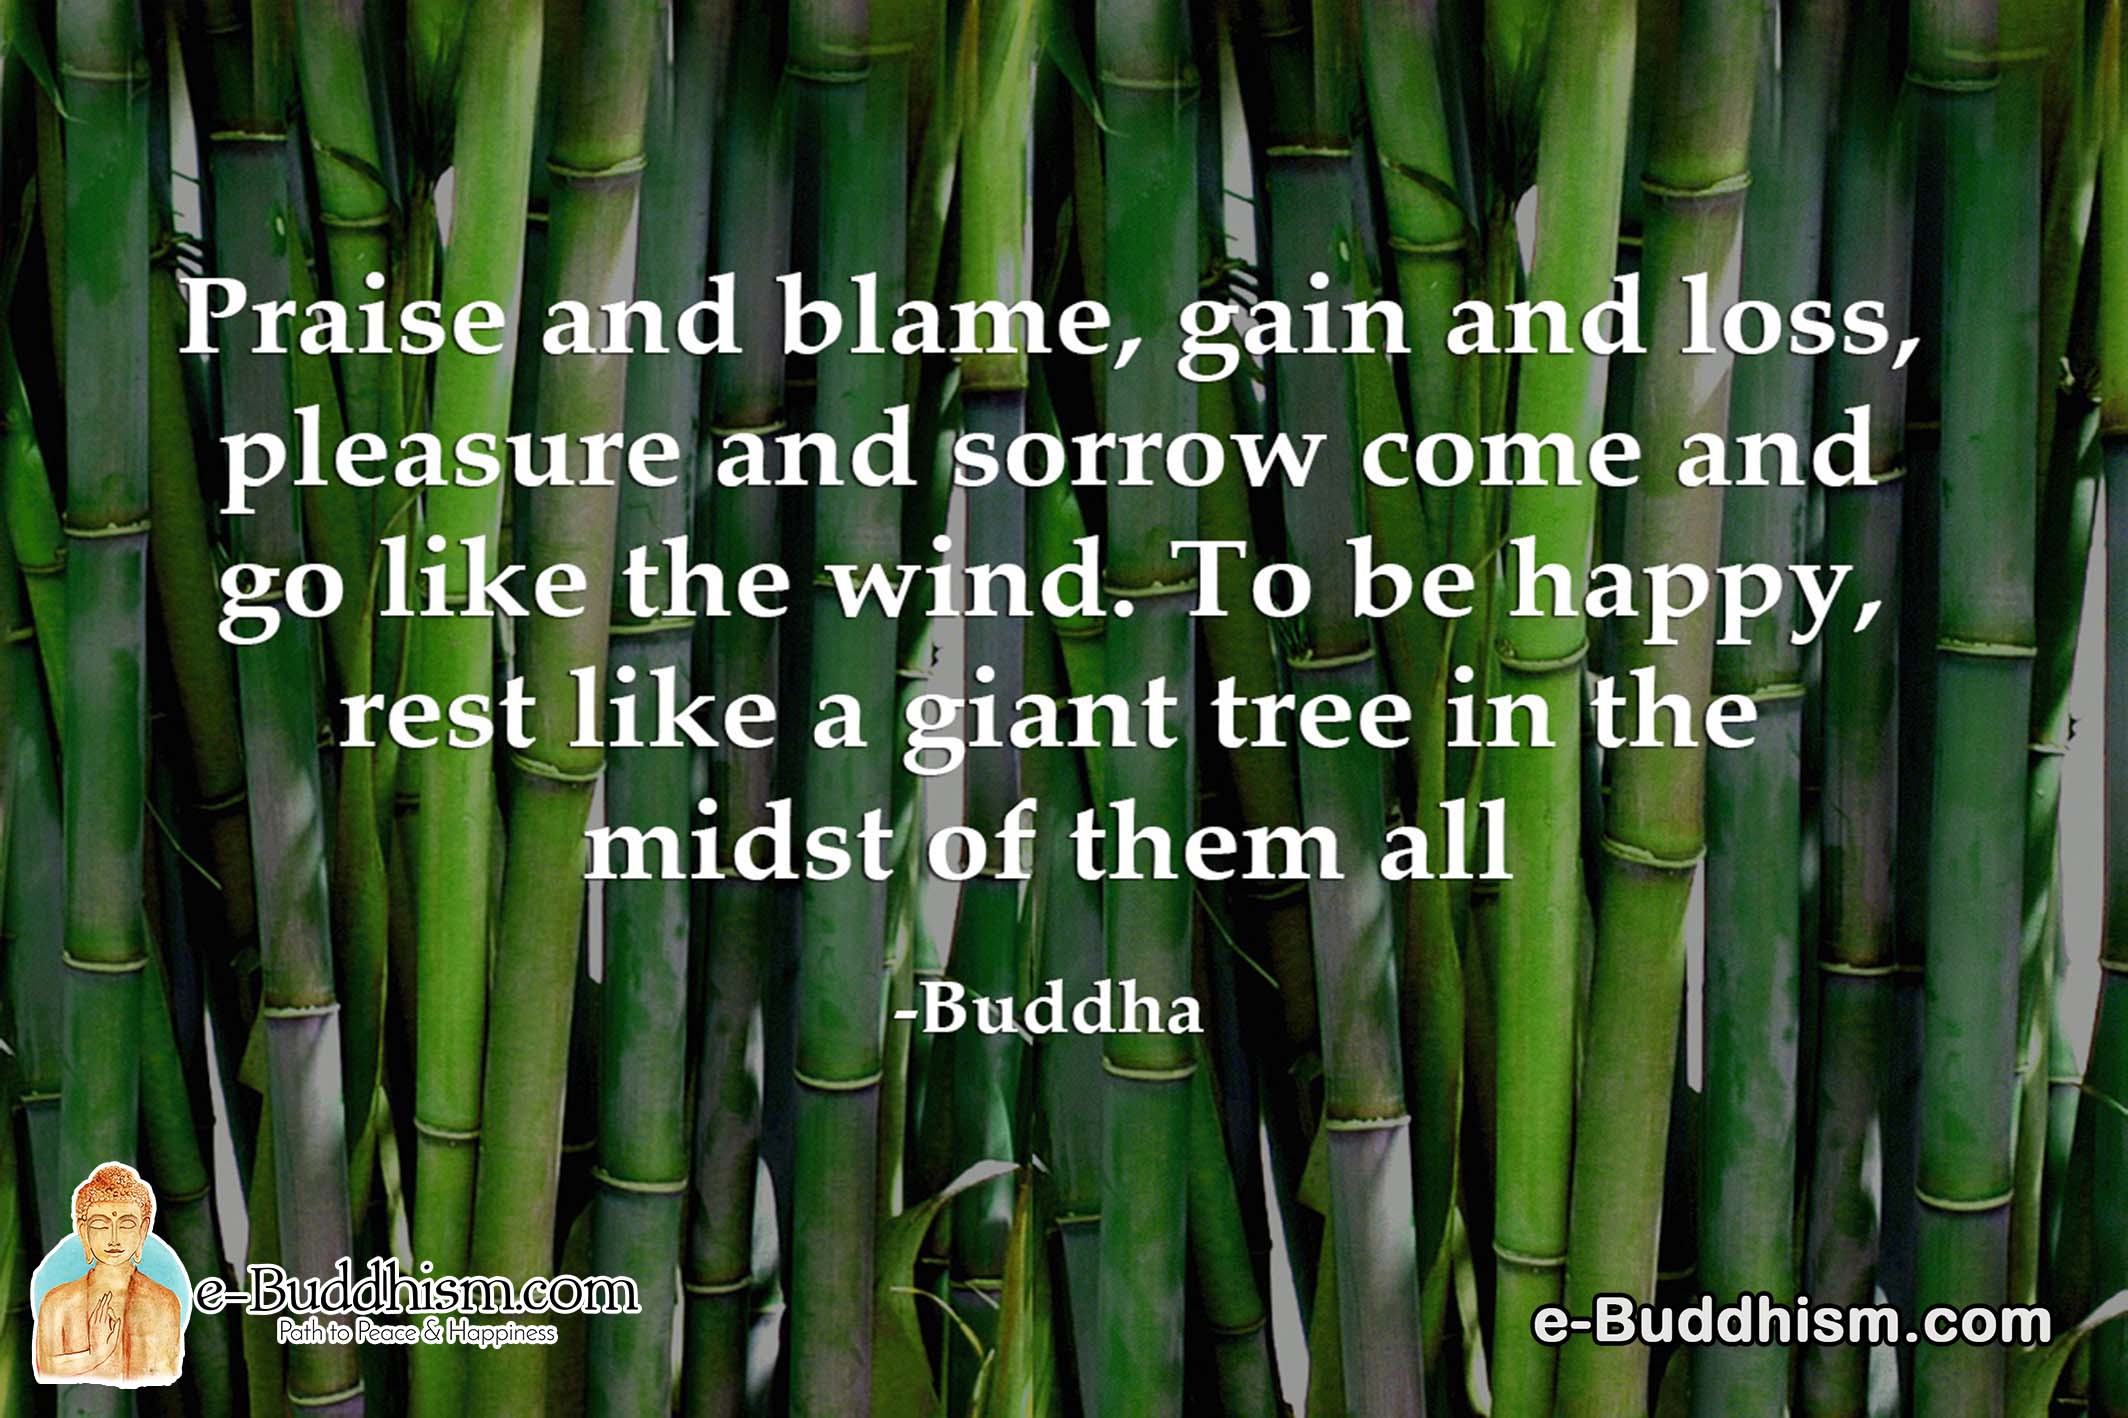 Praise and blame, gain and loss, pleasure and sorrow come and go like the wind. To be happy, rest like a giant tree in the midst of them all. -Buddha